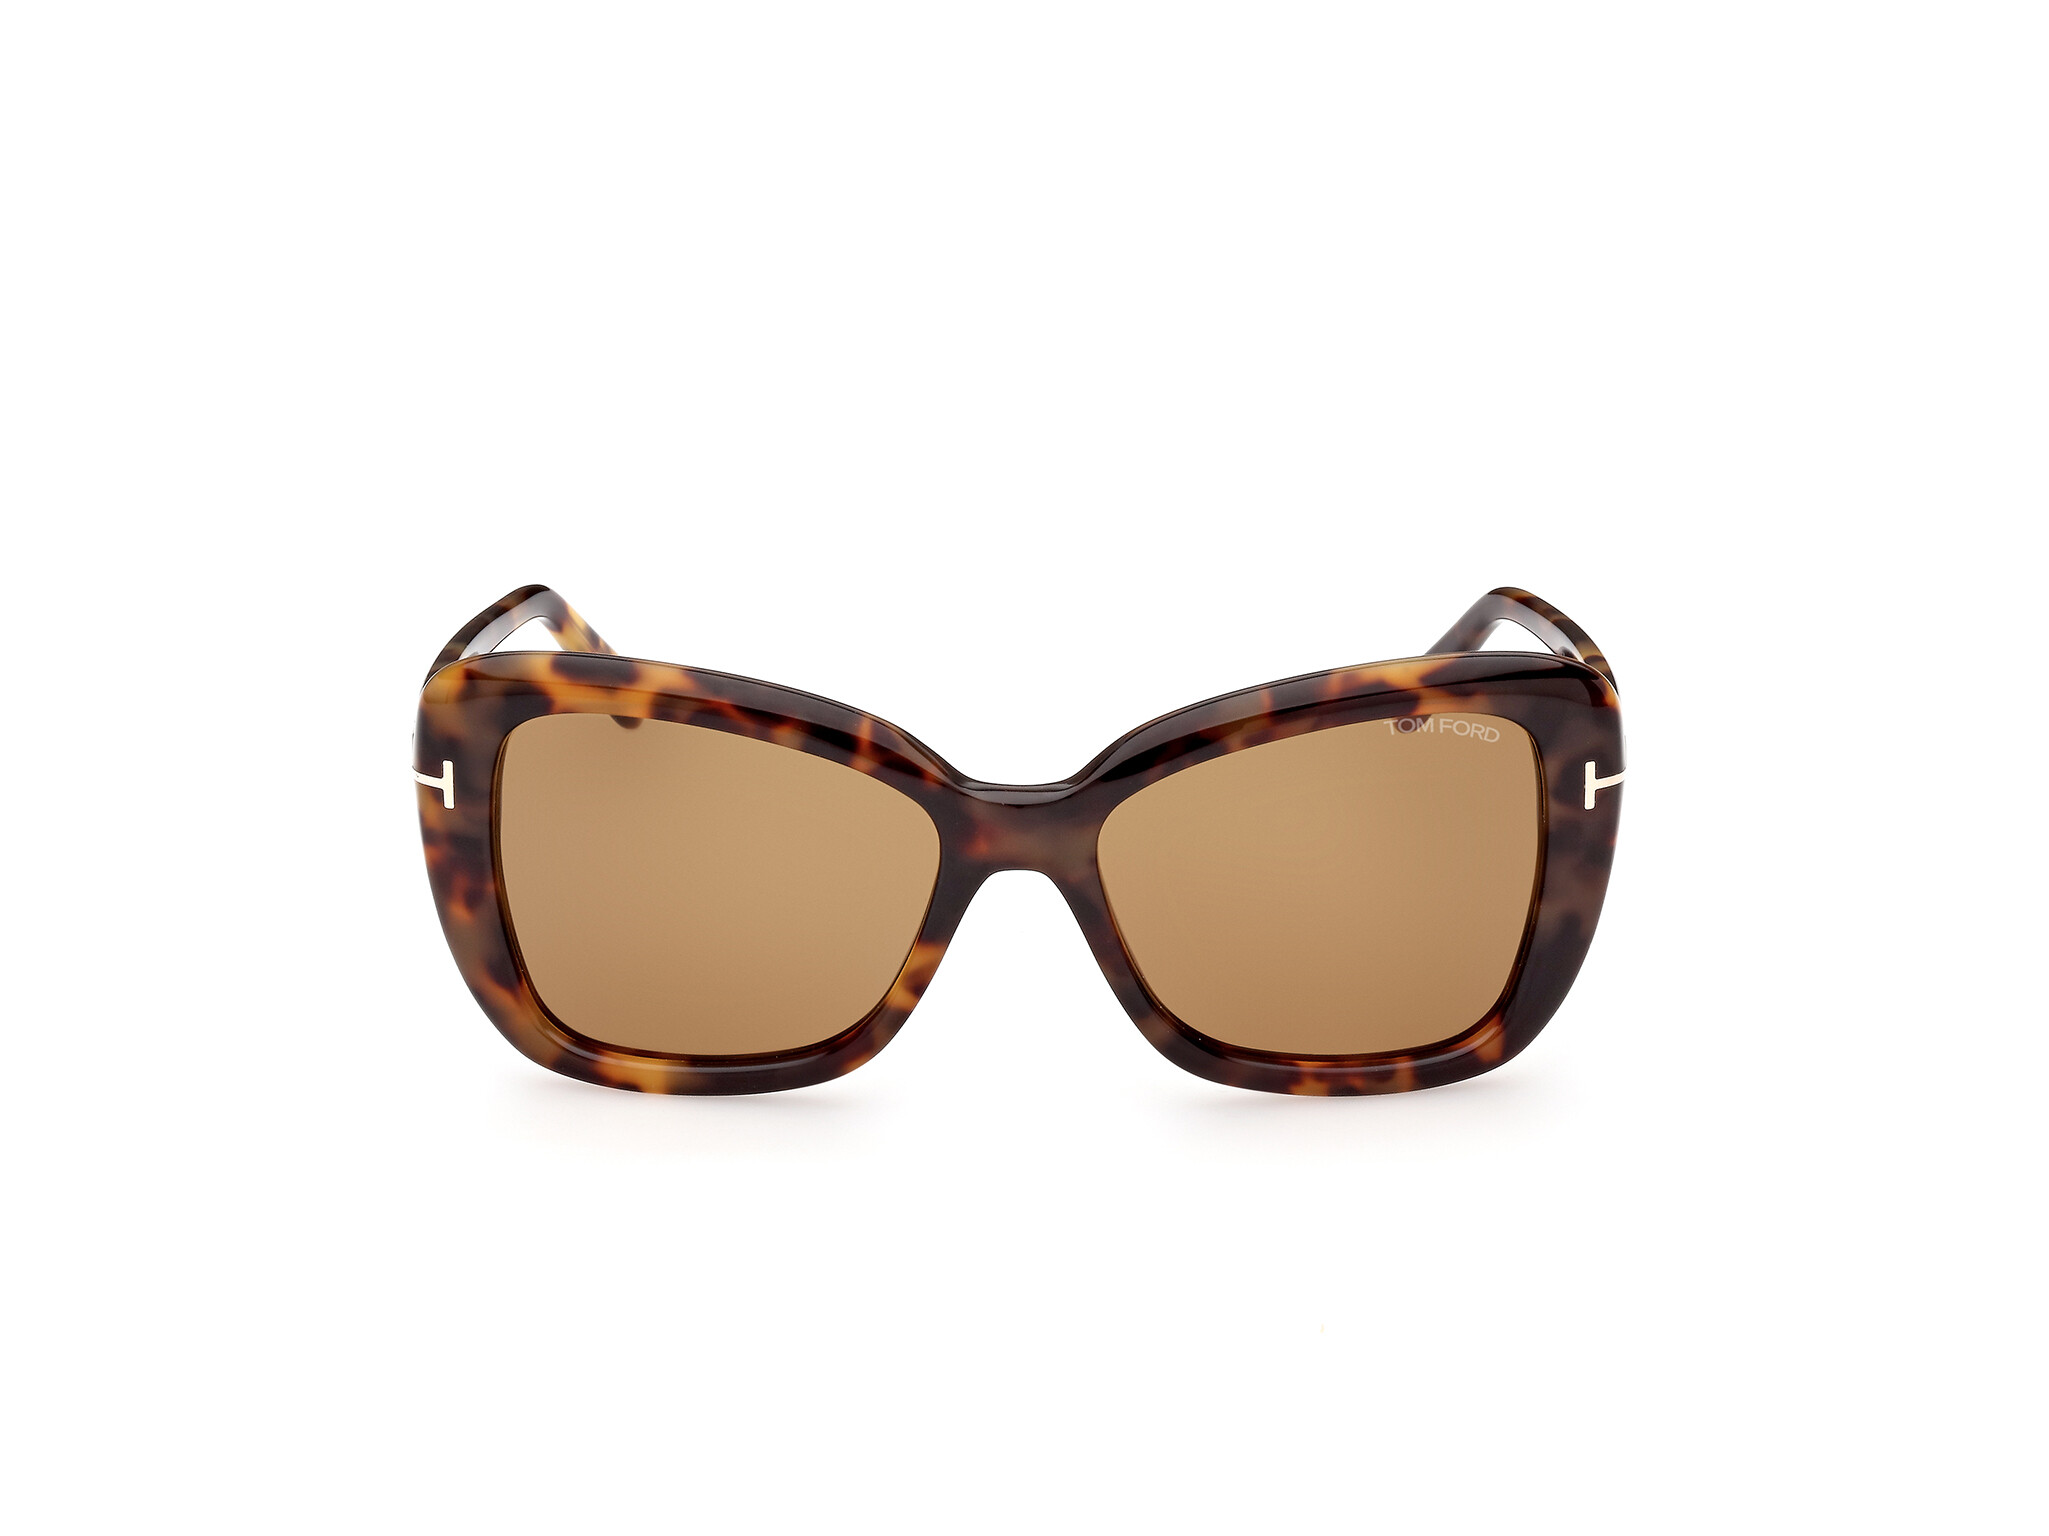 [products.image.front] Tom Ford FT1008 55J Sonnenbrille